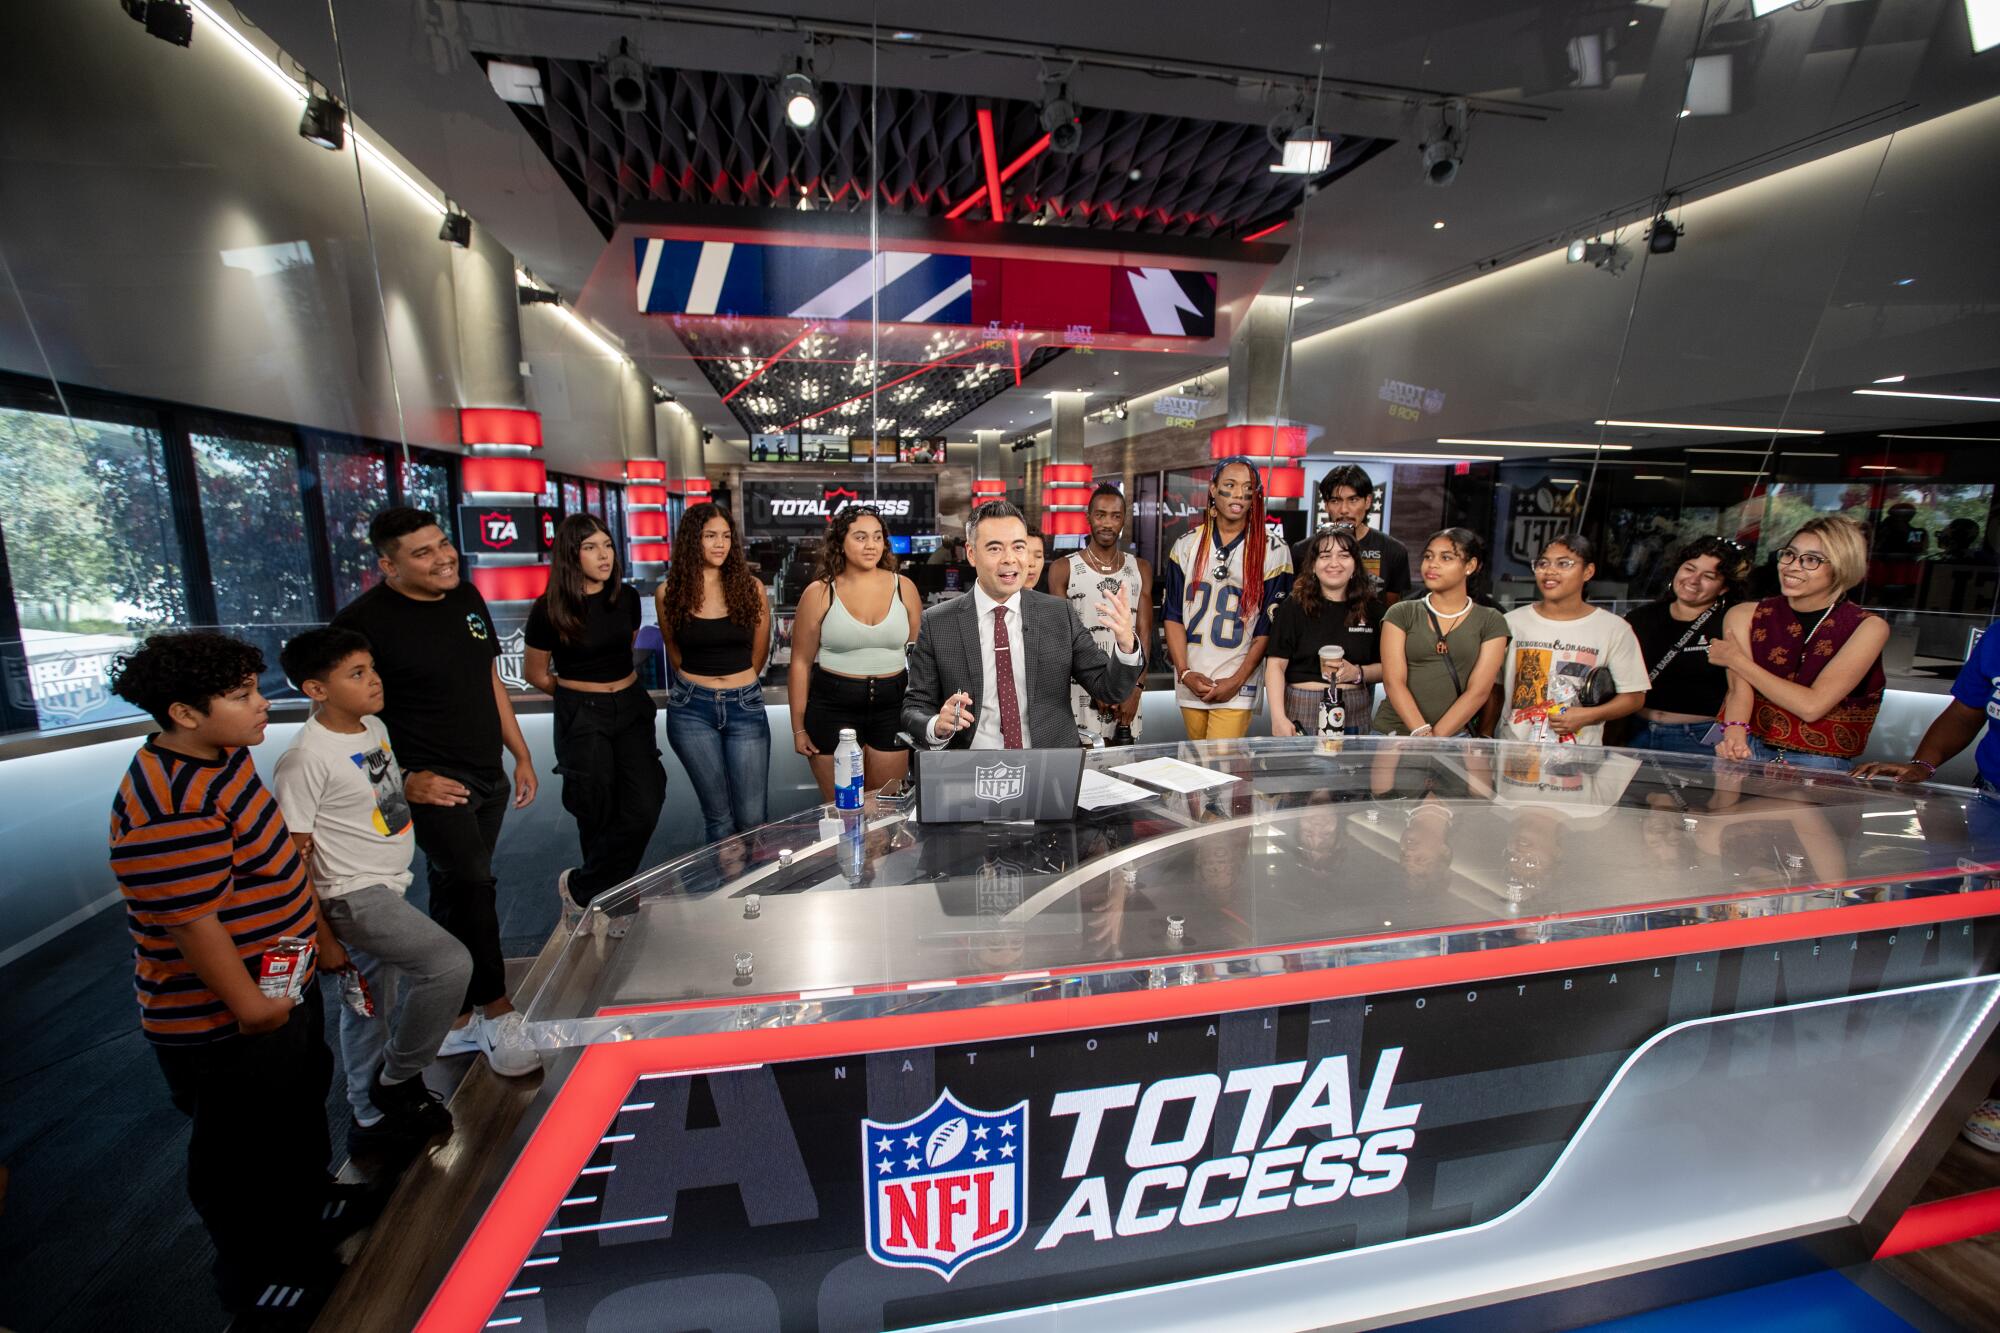 Rainbow Labs students, take photos w Mike Yam, NFL network host, of NFL Total Access program in the newsroom at NFL Studios